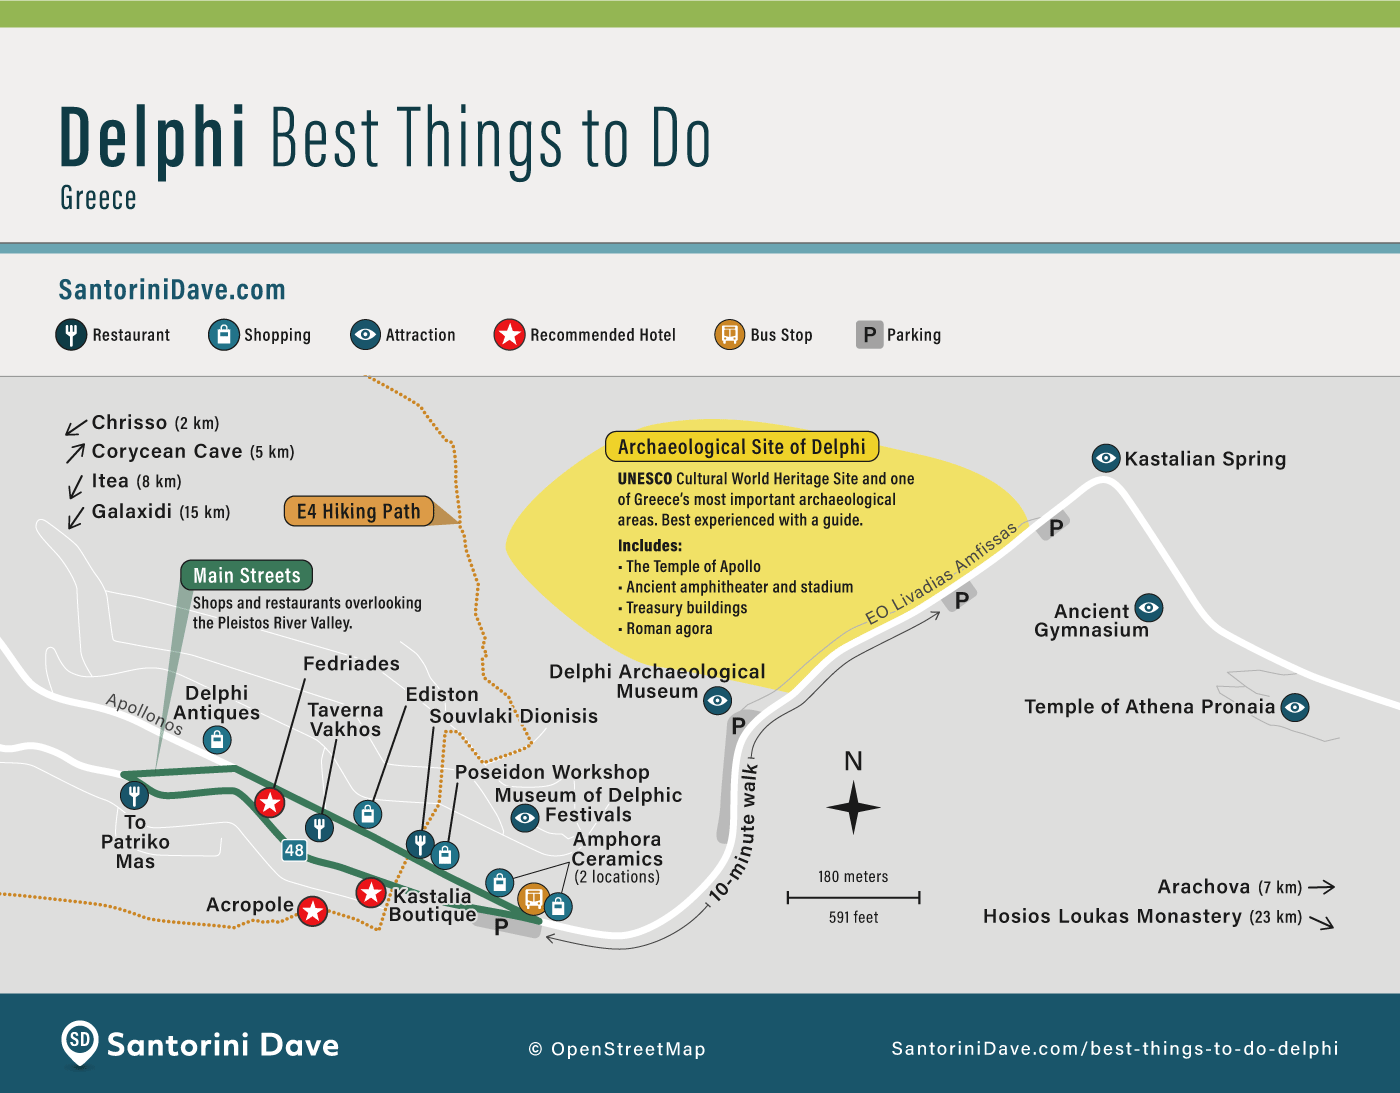 Map of historic sites and other attractions in Delphi, Greece